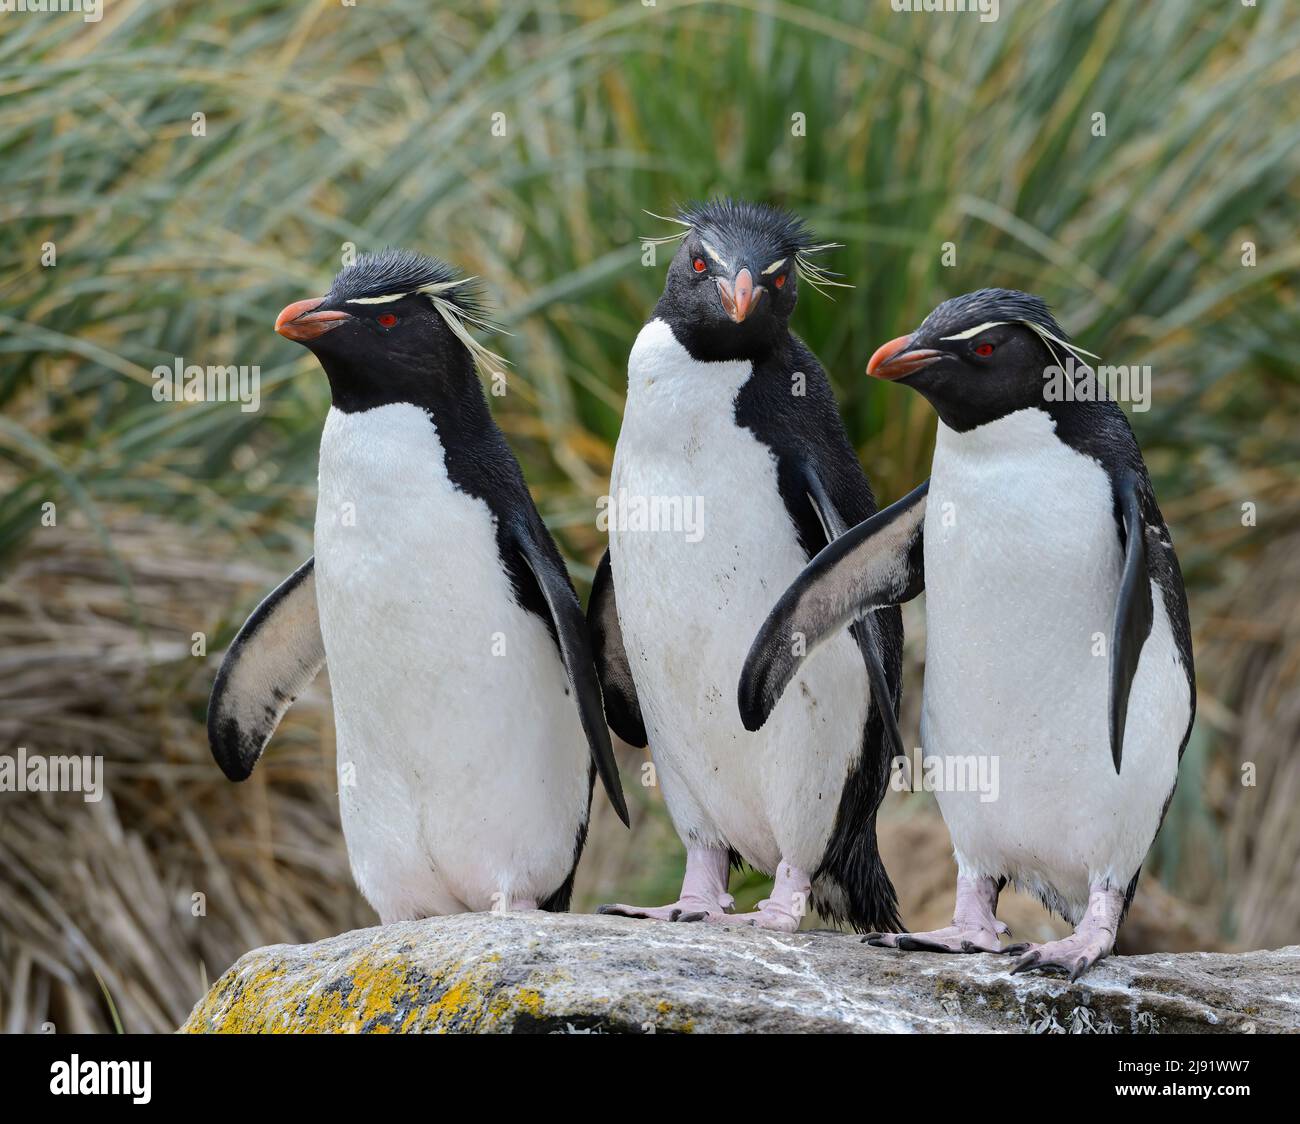 Group of 3 Rockhopper Penguins perched on a rock with tussock grass in background Stock Photo